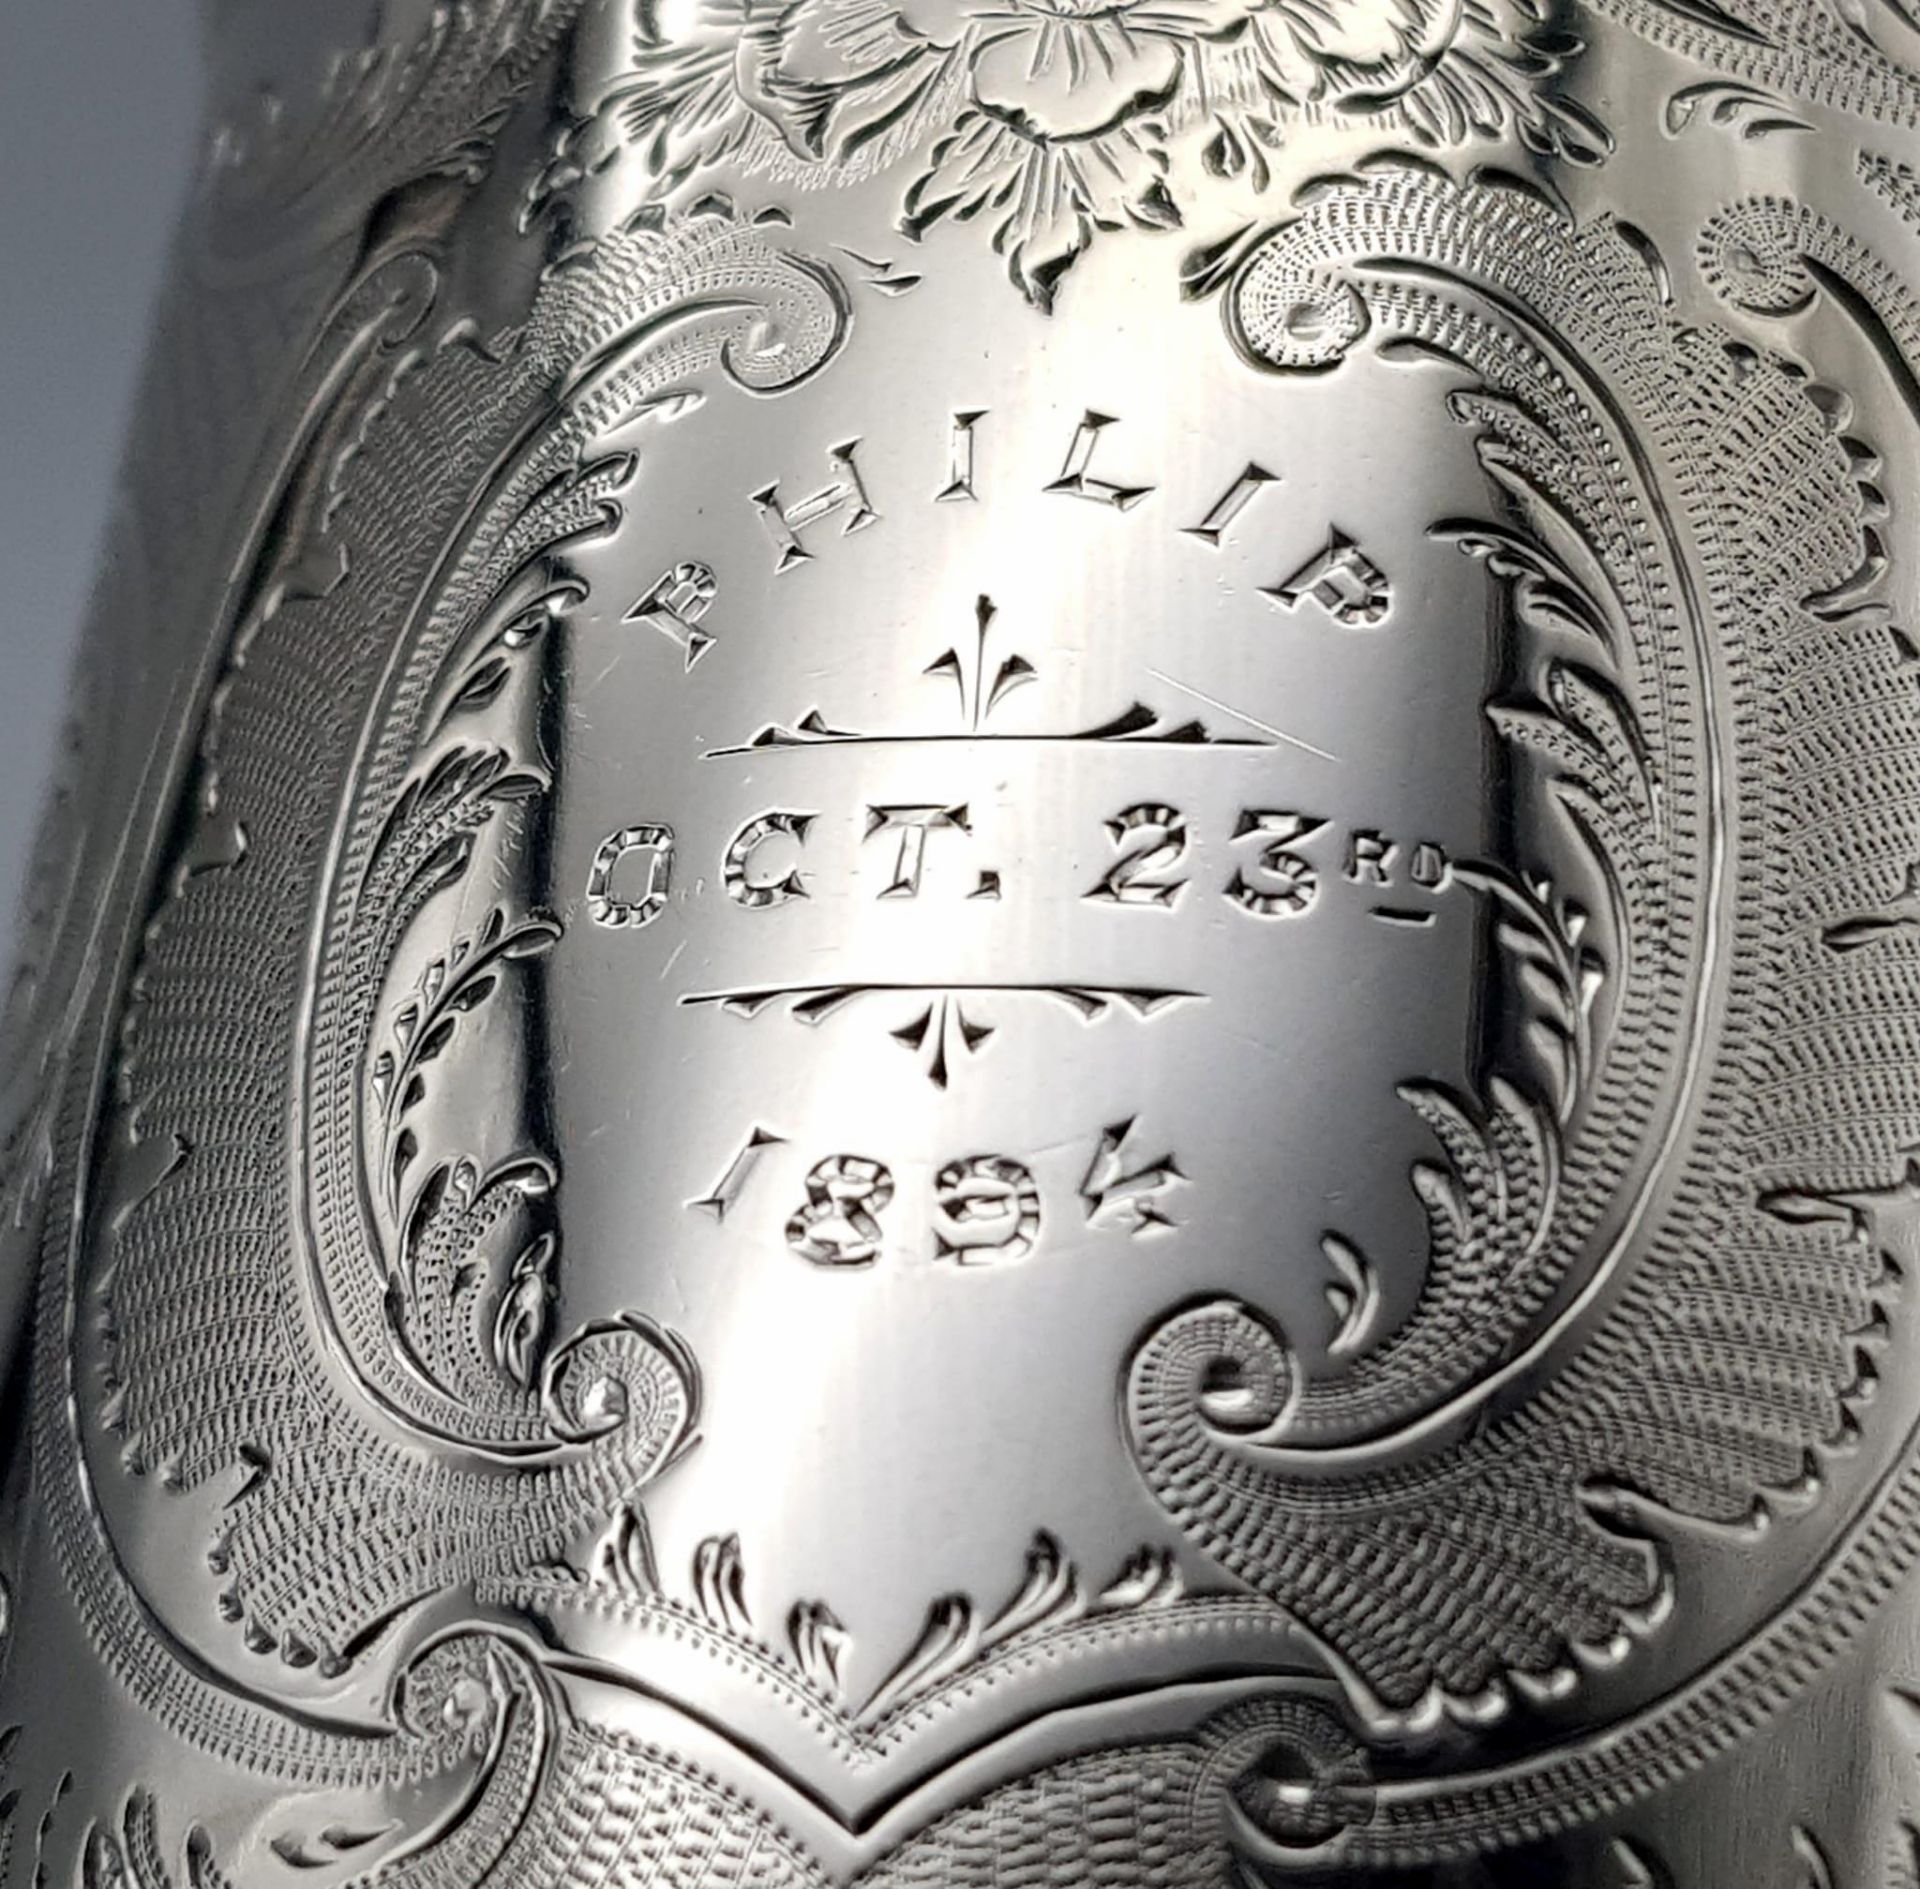 AN ANTIQUE SILVER TANKARD INSCRIBED "PHILIP OCTOBER 23rd 1894" ALL HAND ENGRAVED BY A MASTER - Image 7 of 8